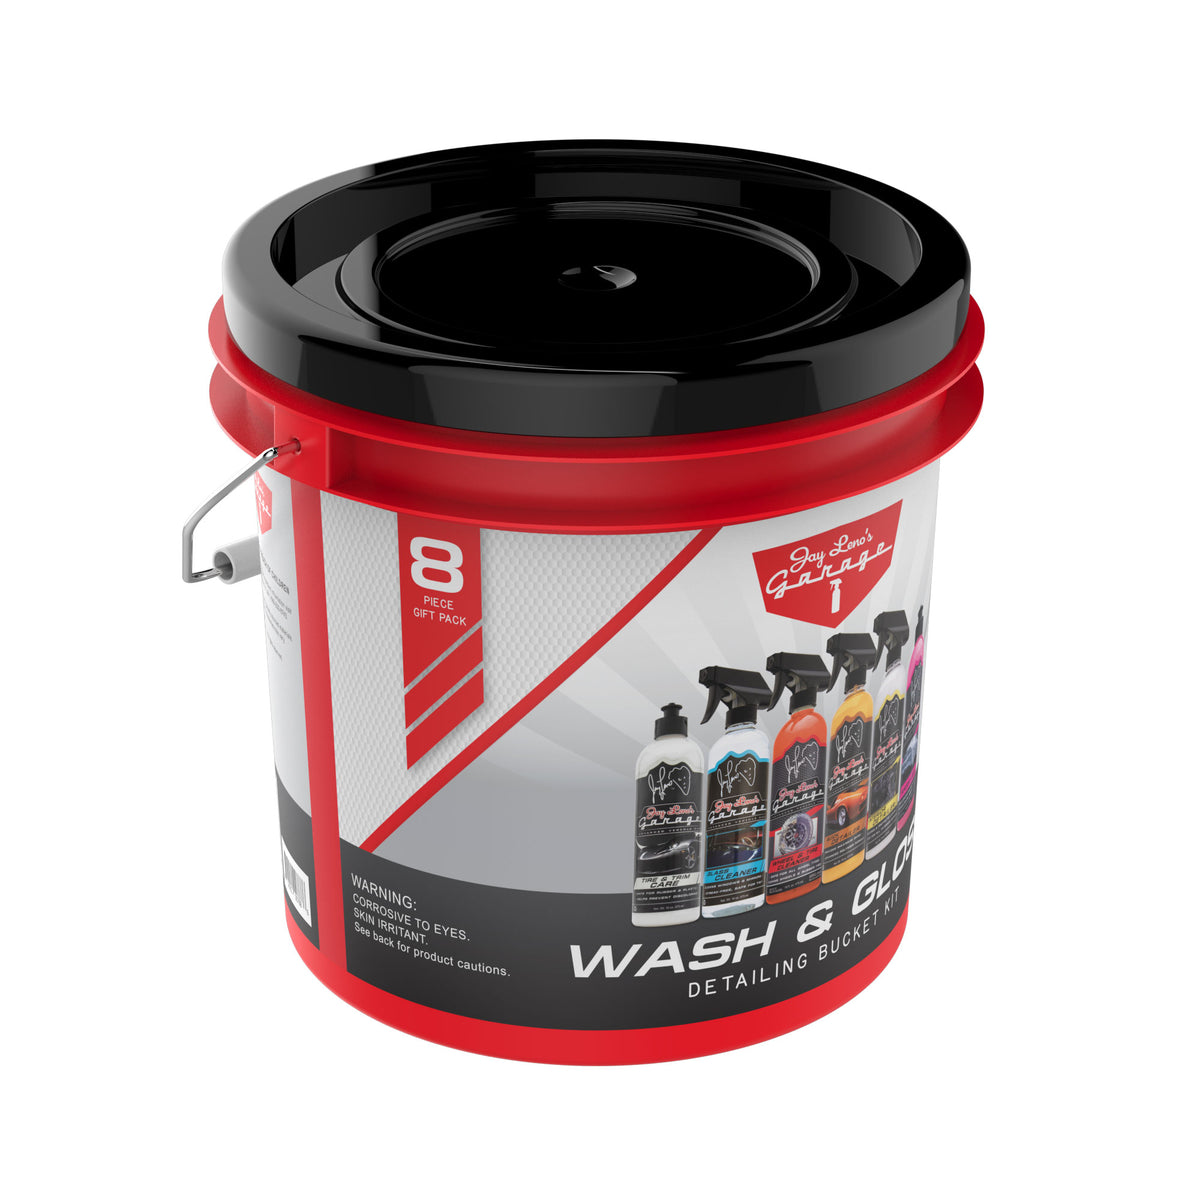 ULTIMATE CAR CARE DETAILING BUCKET — ADS Auto Detail Supplies